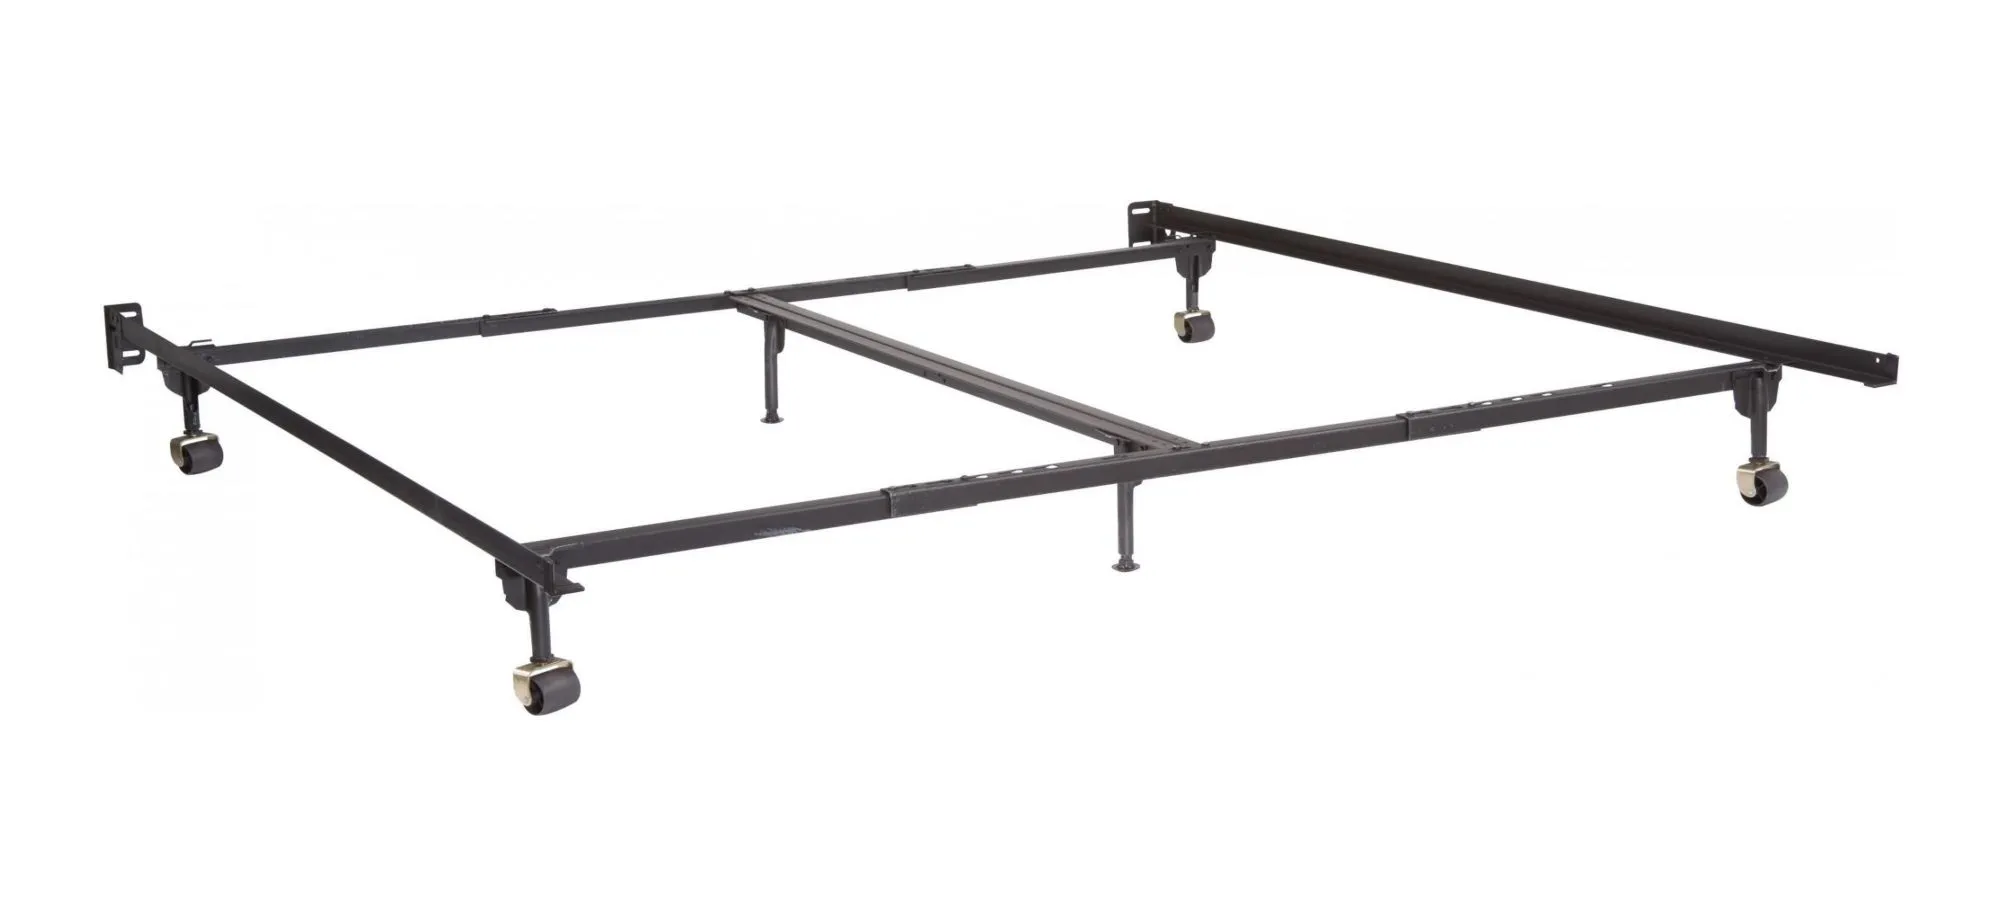 Adjustable Bed Frame w/ Casters - Queen/King by Glideaway.